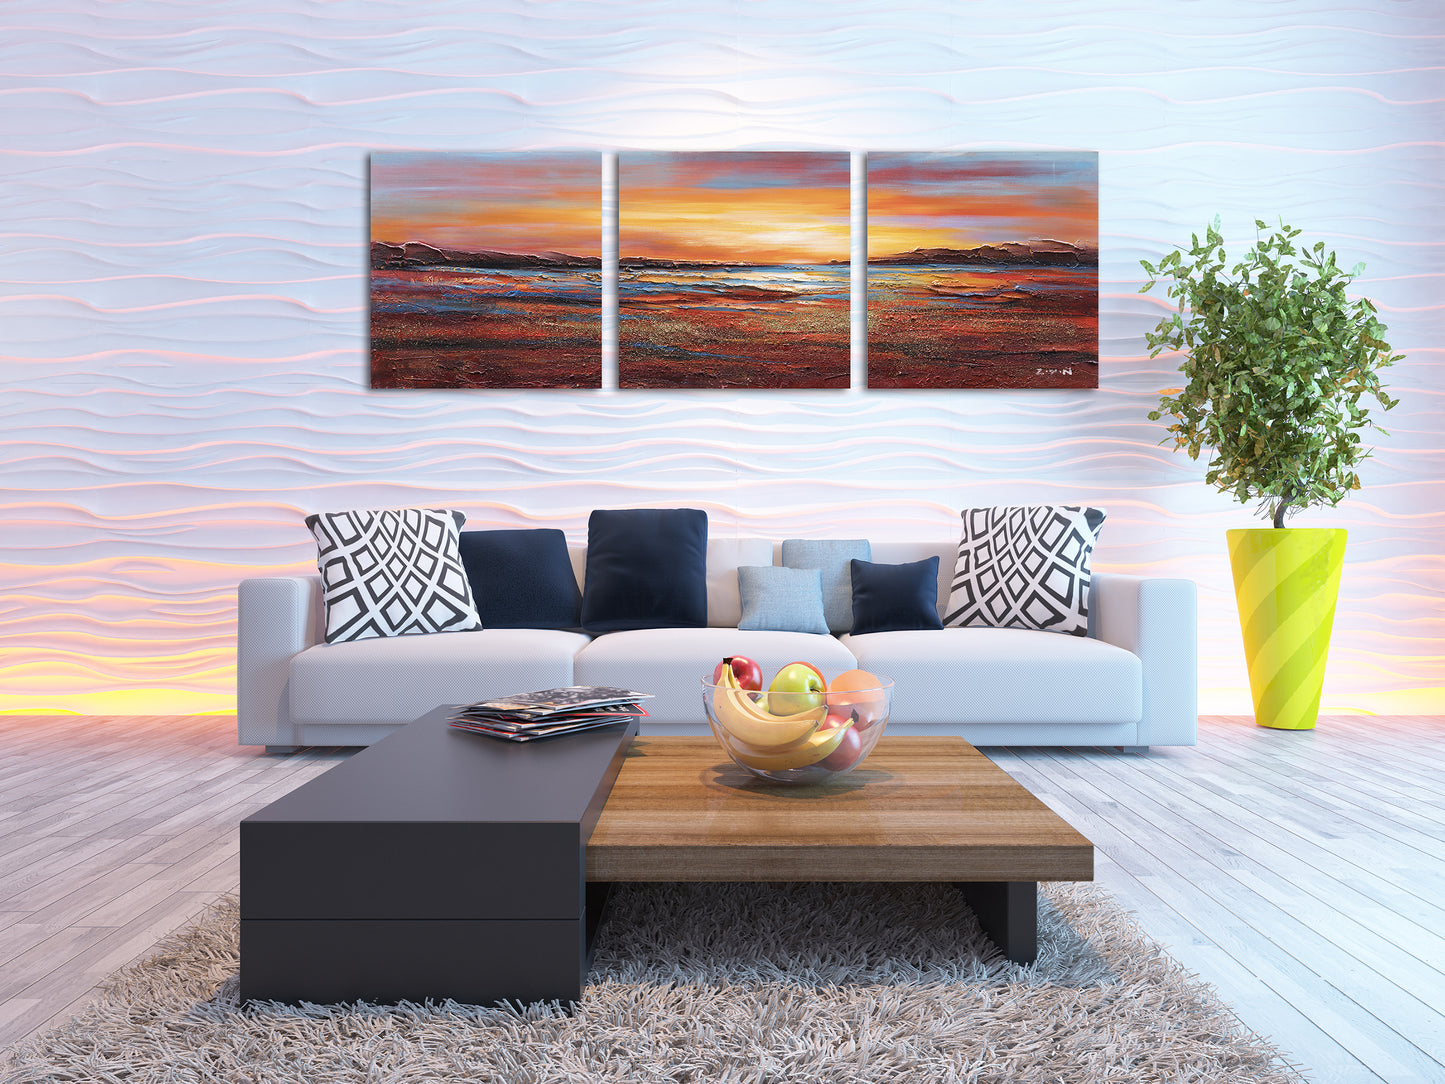 "Sunset Dreams I" Hand Painted on Wrapped Canvas